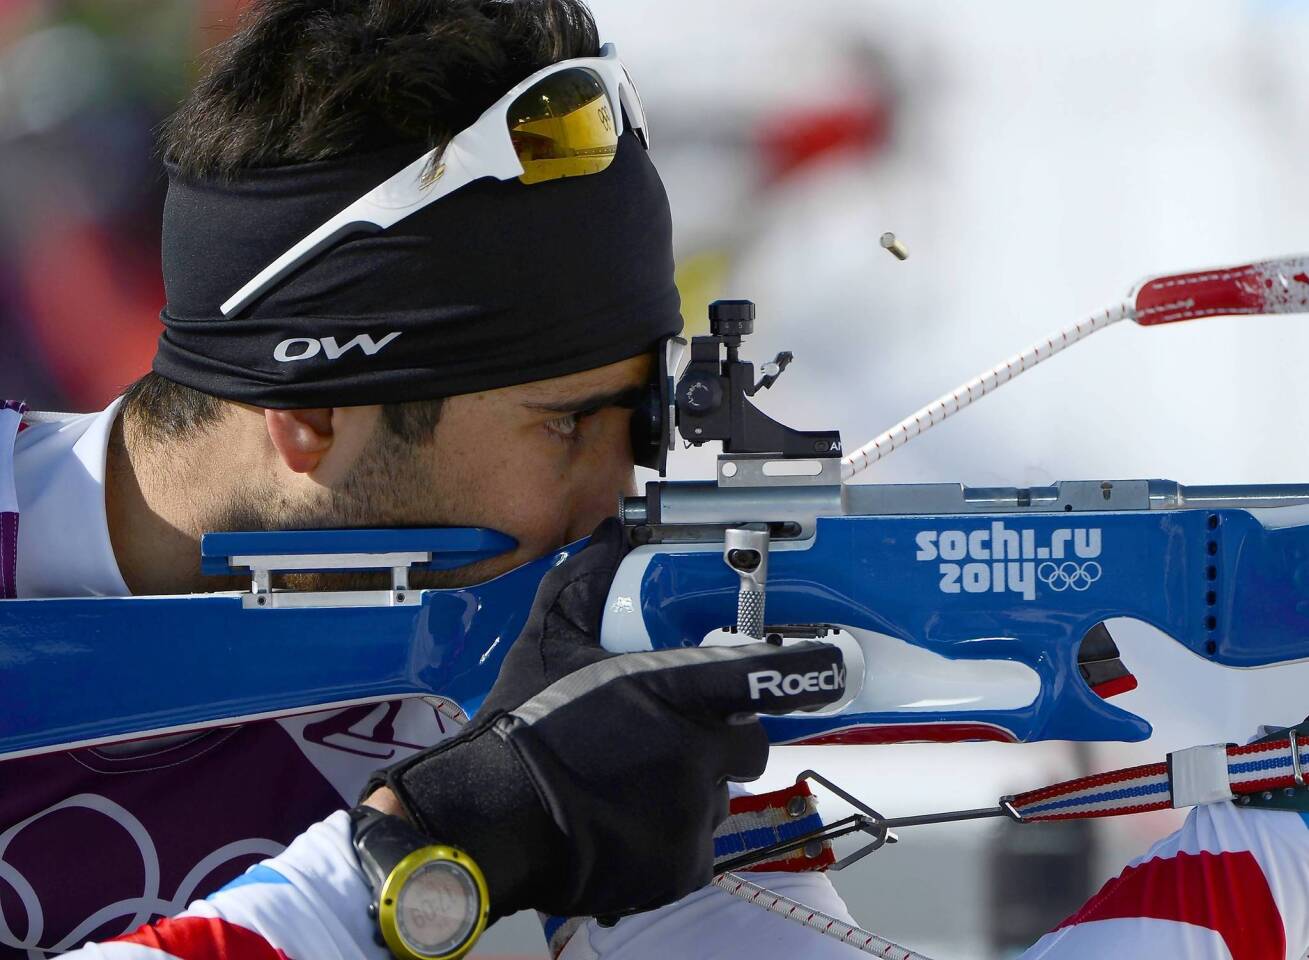 France's biathlon athlete Martin Fourcade ejects a shell during a training session at the Laura Cross Country Skiing and Biathlon Centre in Rosa Khutor.